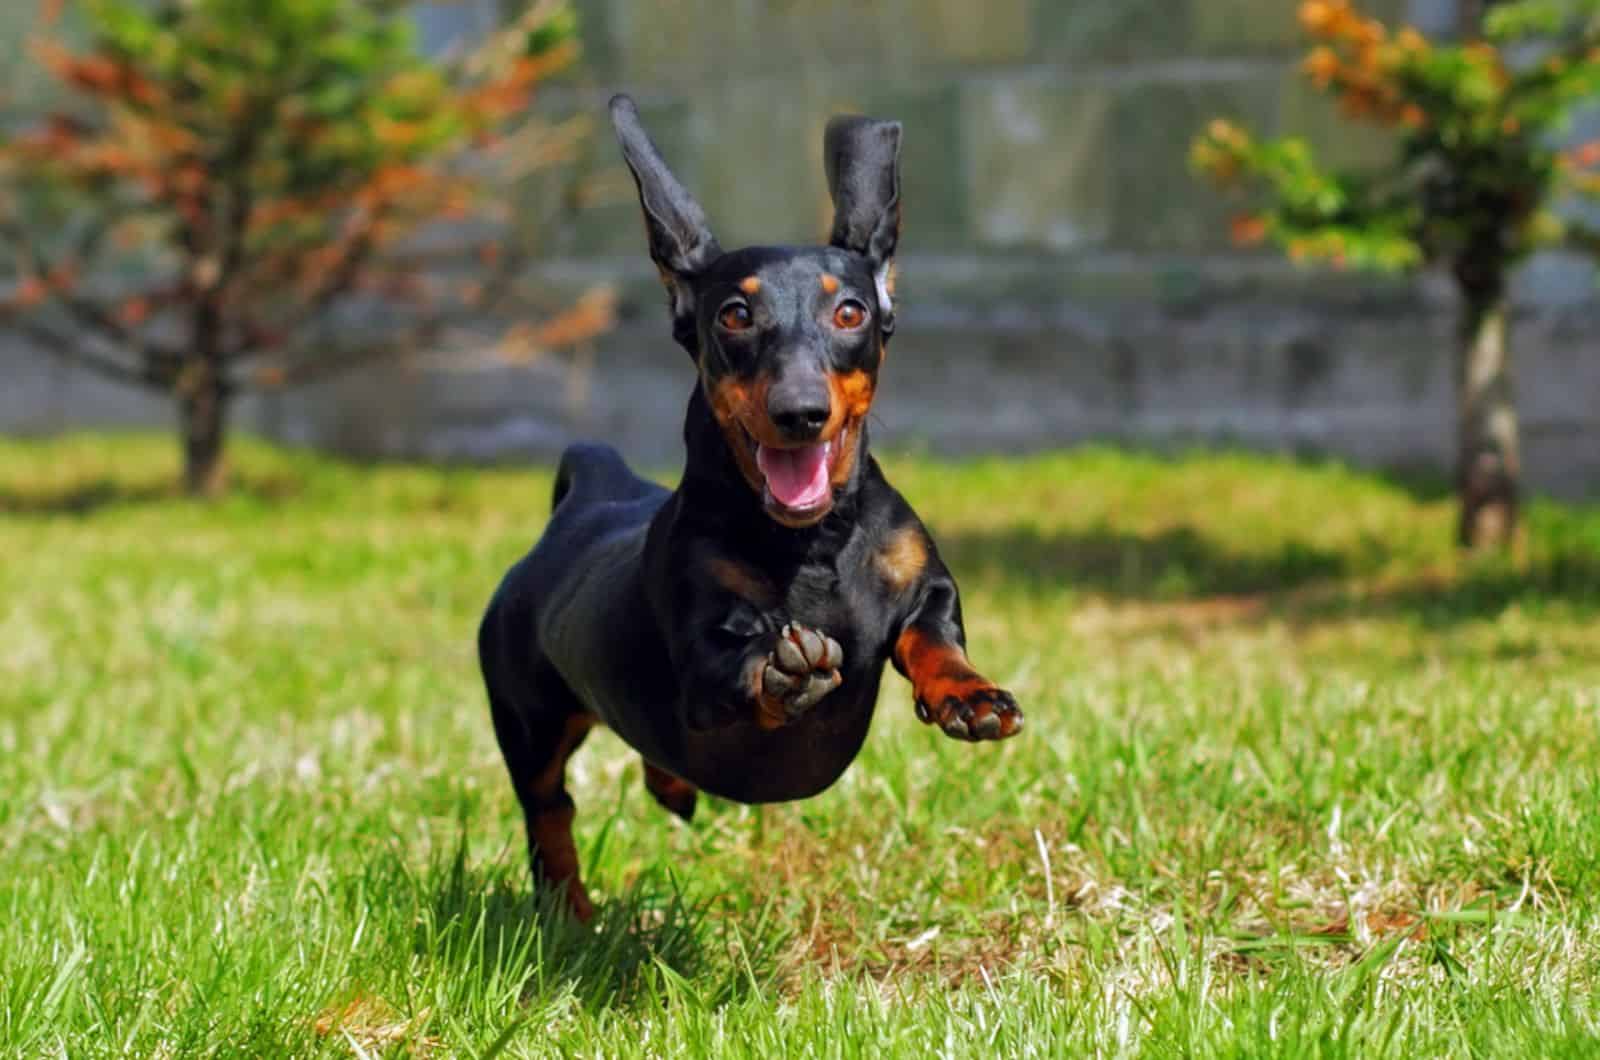 dachshund running and jumping in the yard